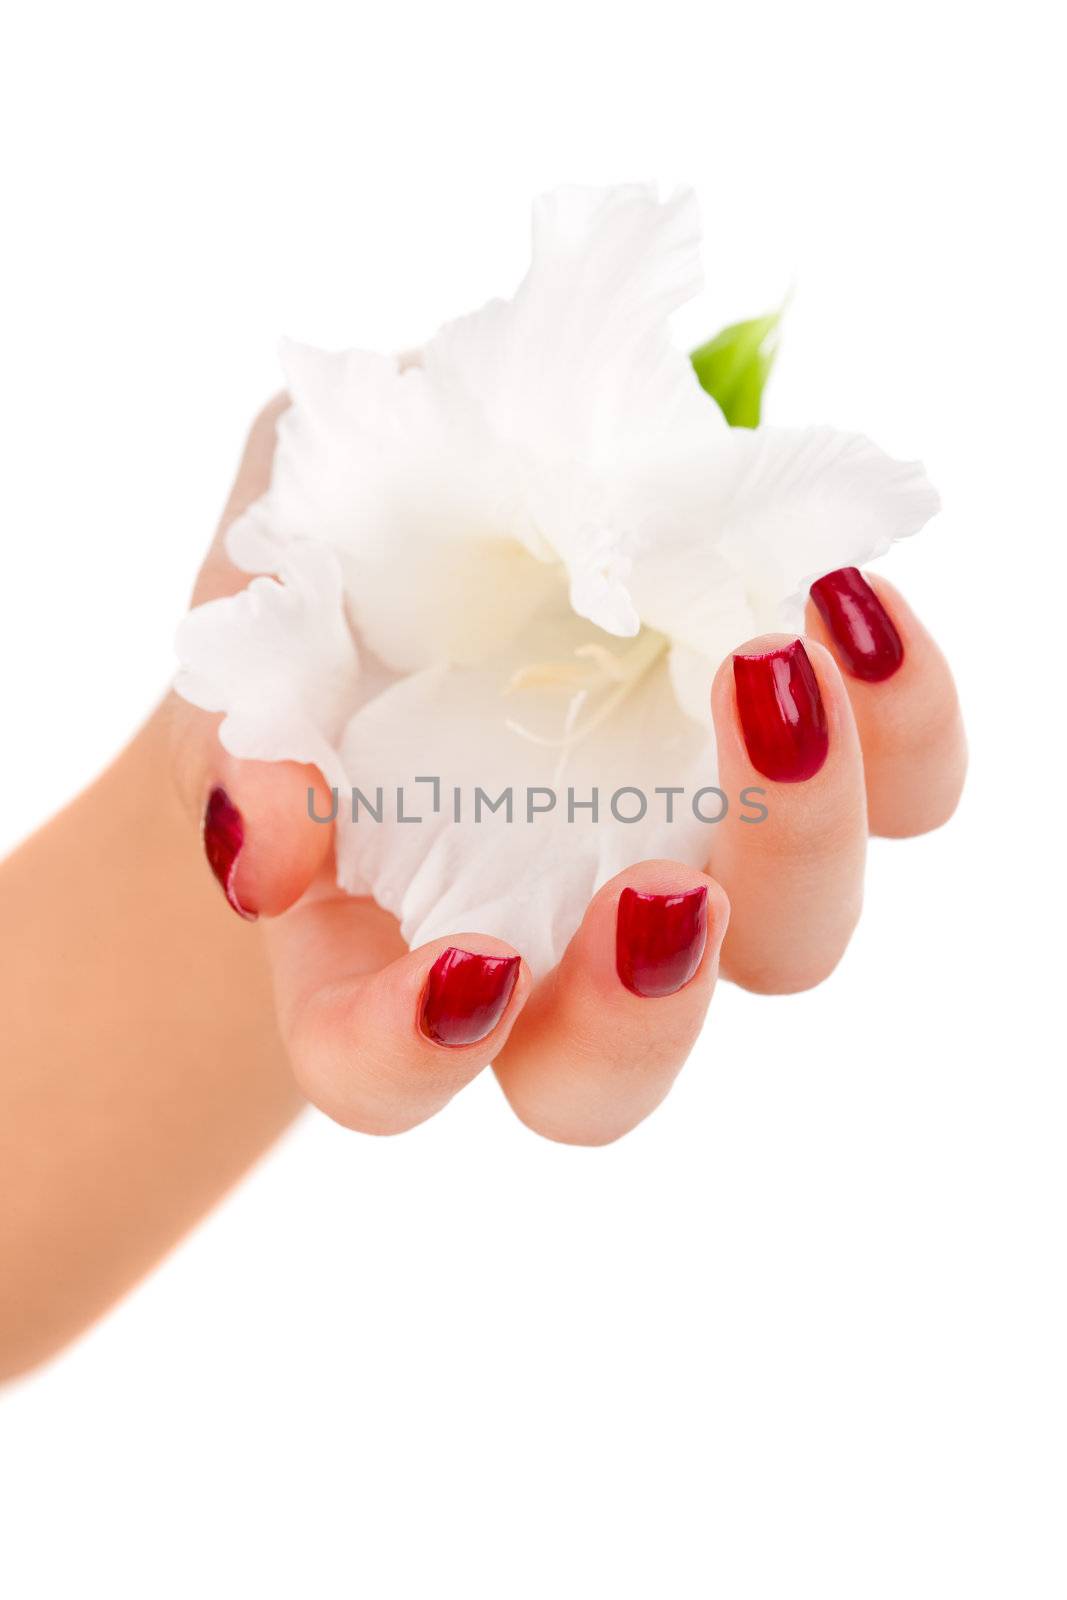 Beautiful nails and fingers by mihhailov